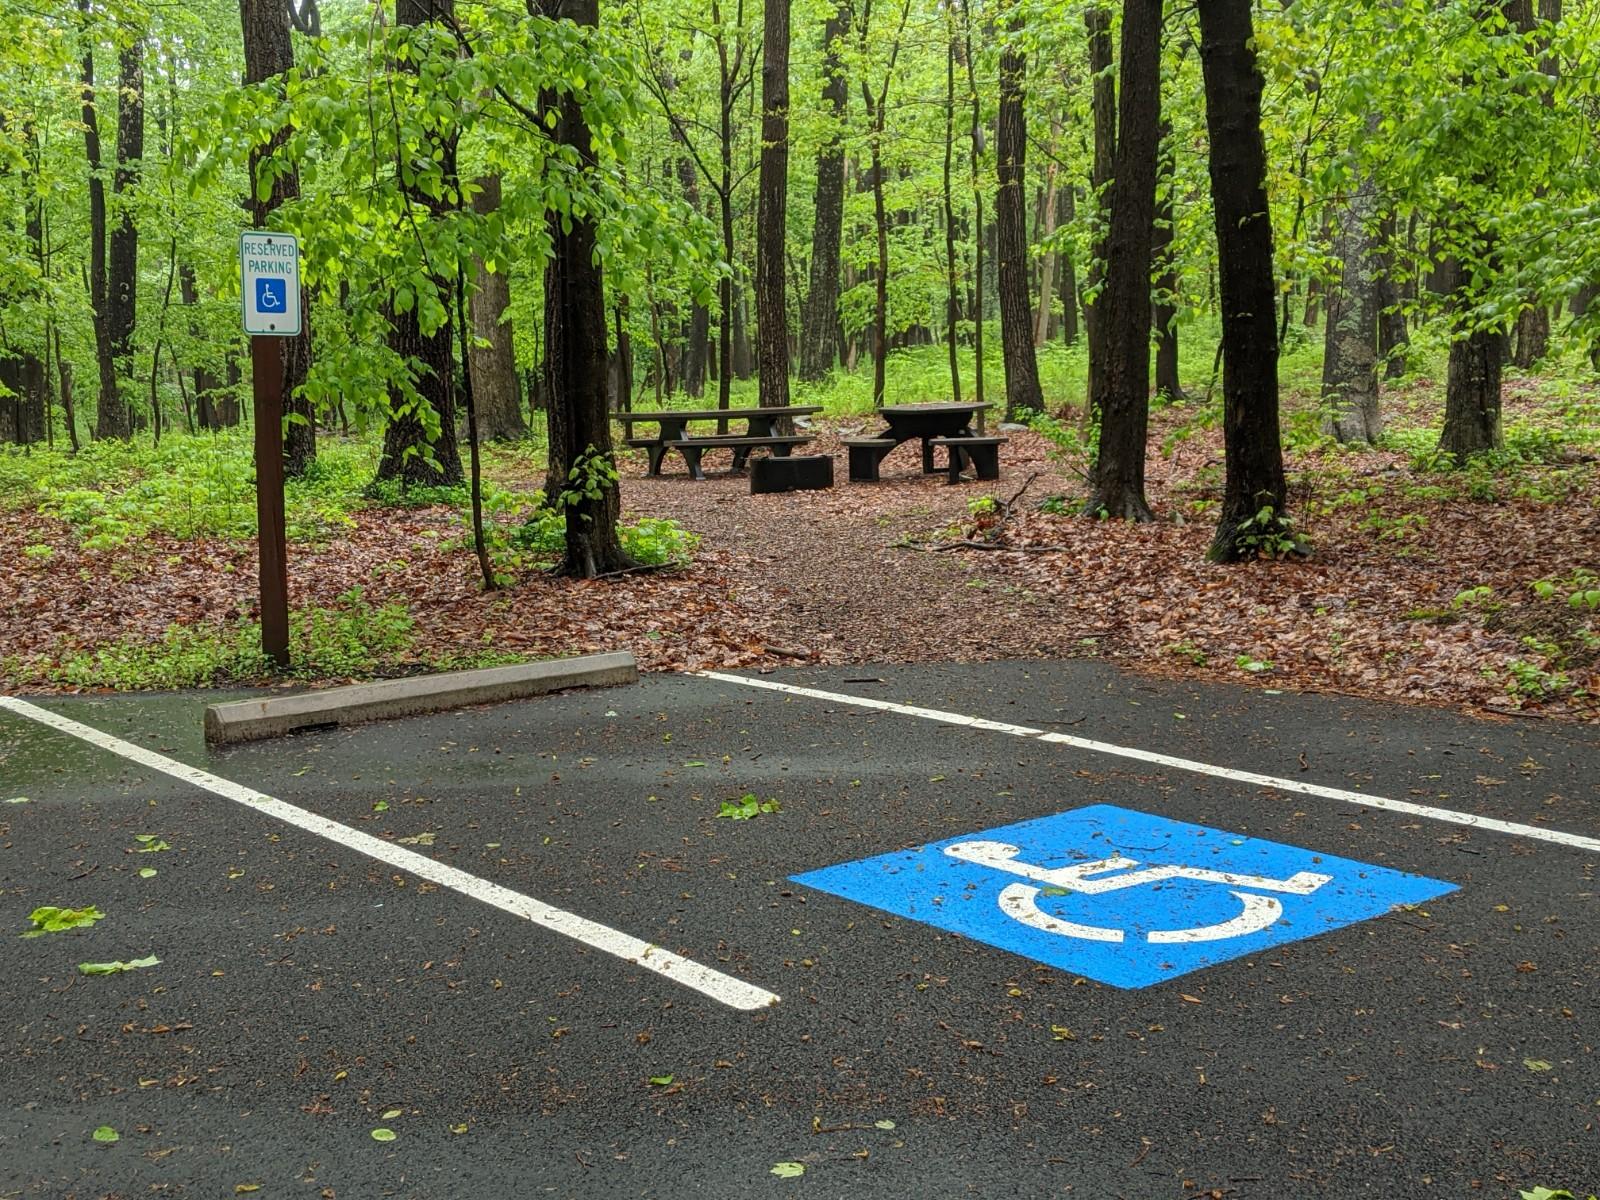 Handicapped Parking space at picnic area. Several feet away is a picnic table and grill. 